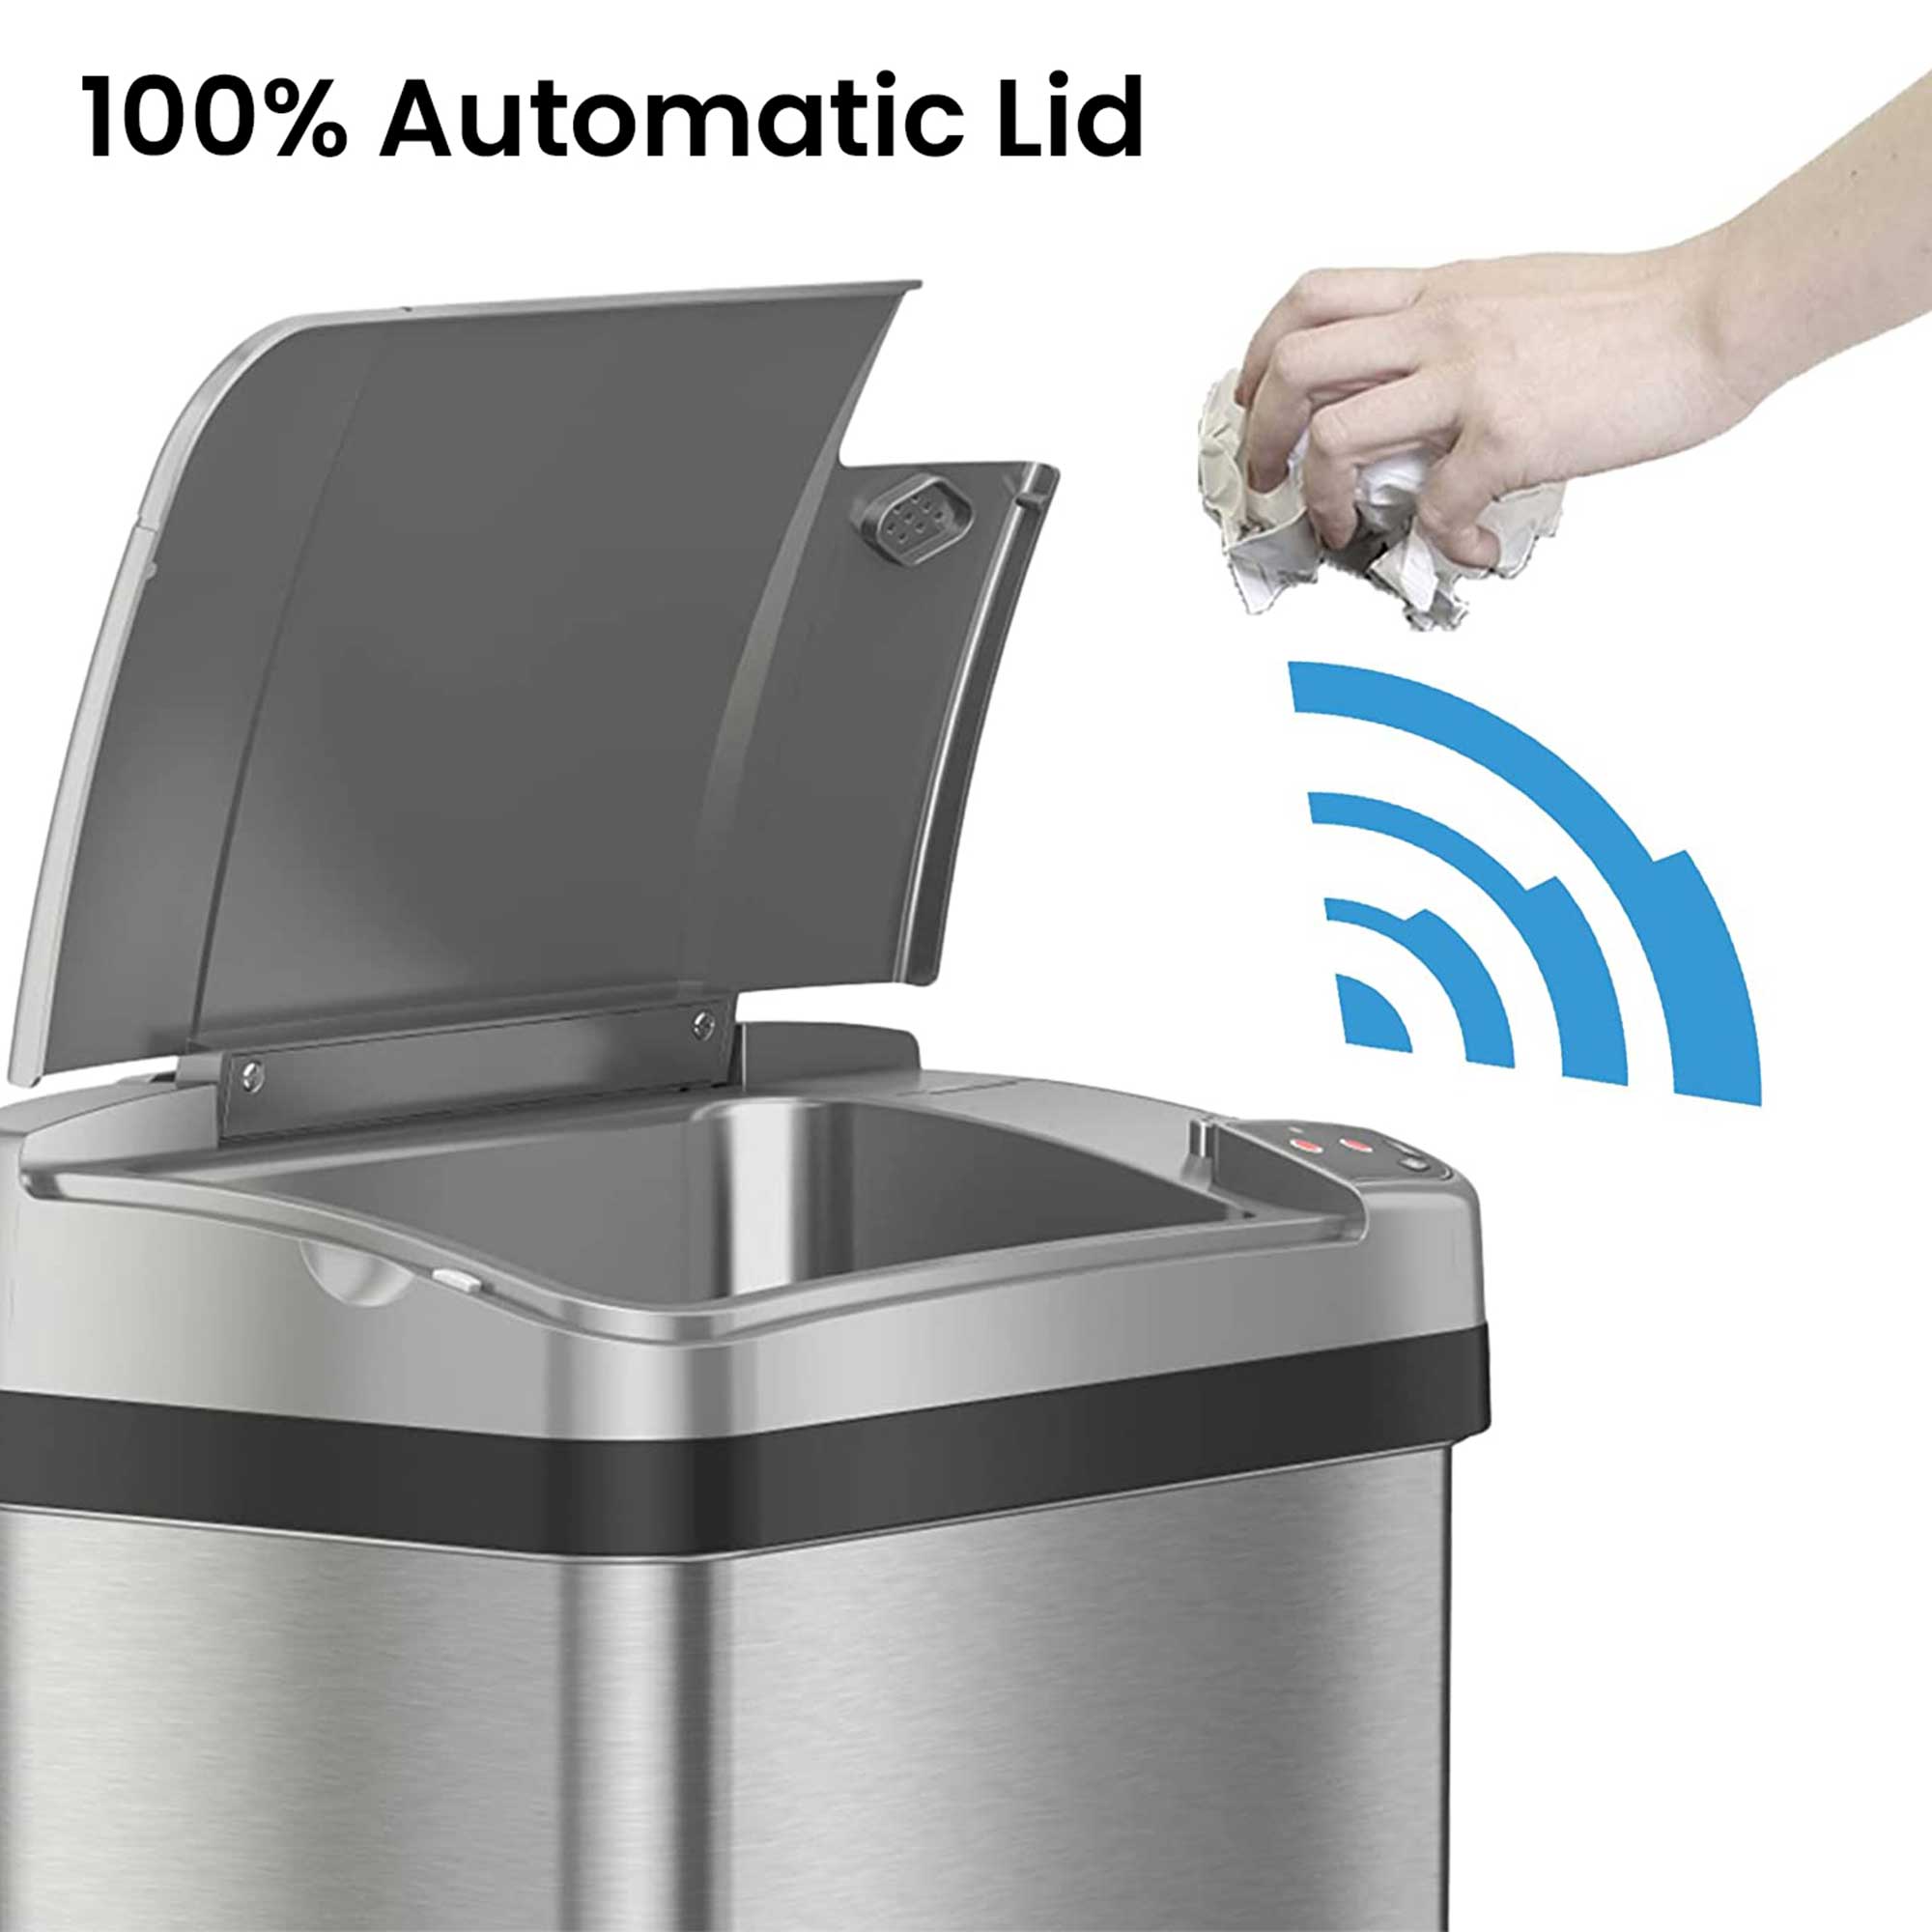 4 Gallon Stainless Steel Slim Sensor Trash Can (Left Side Lid Open) –  iTouchless Housewares and Products Inc.